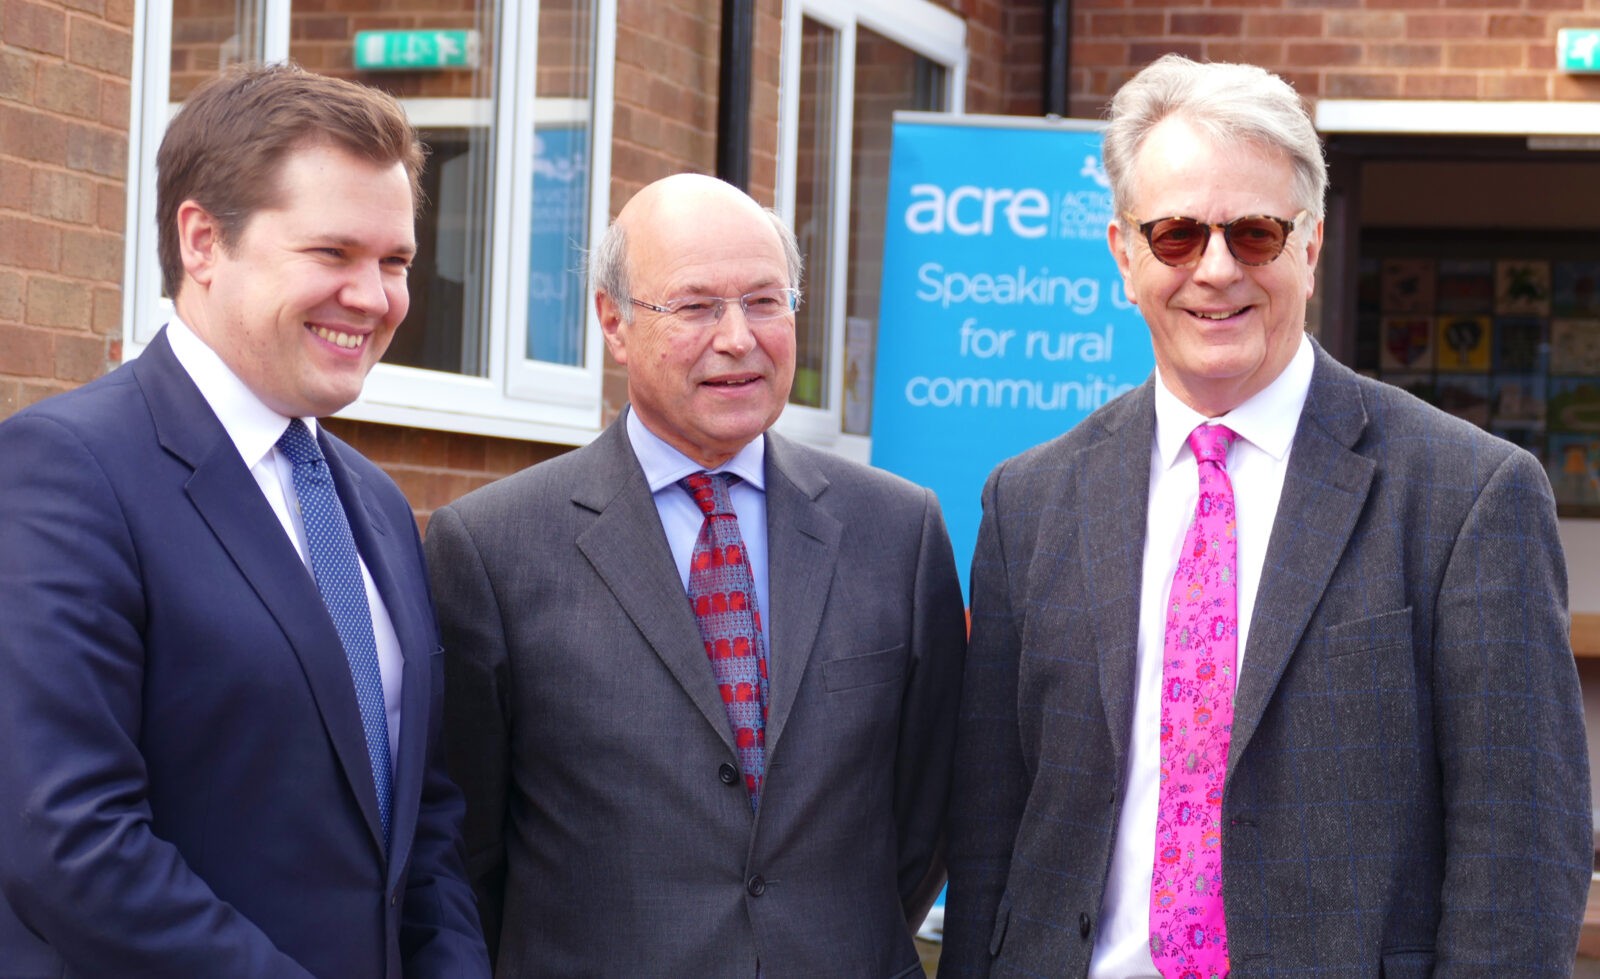 Robert Jenrick MP and Lord Gardiner of Kimble launch a new £3m grant for village halls.